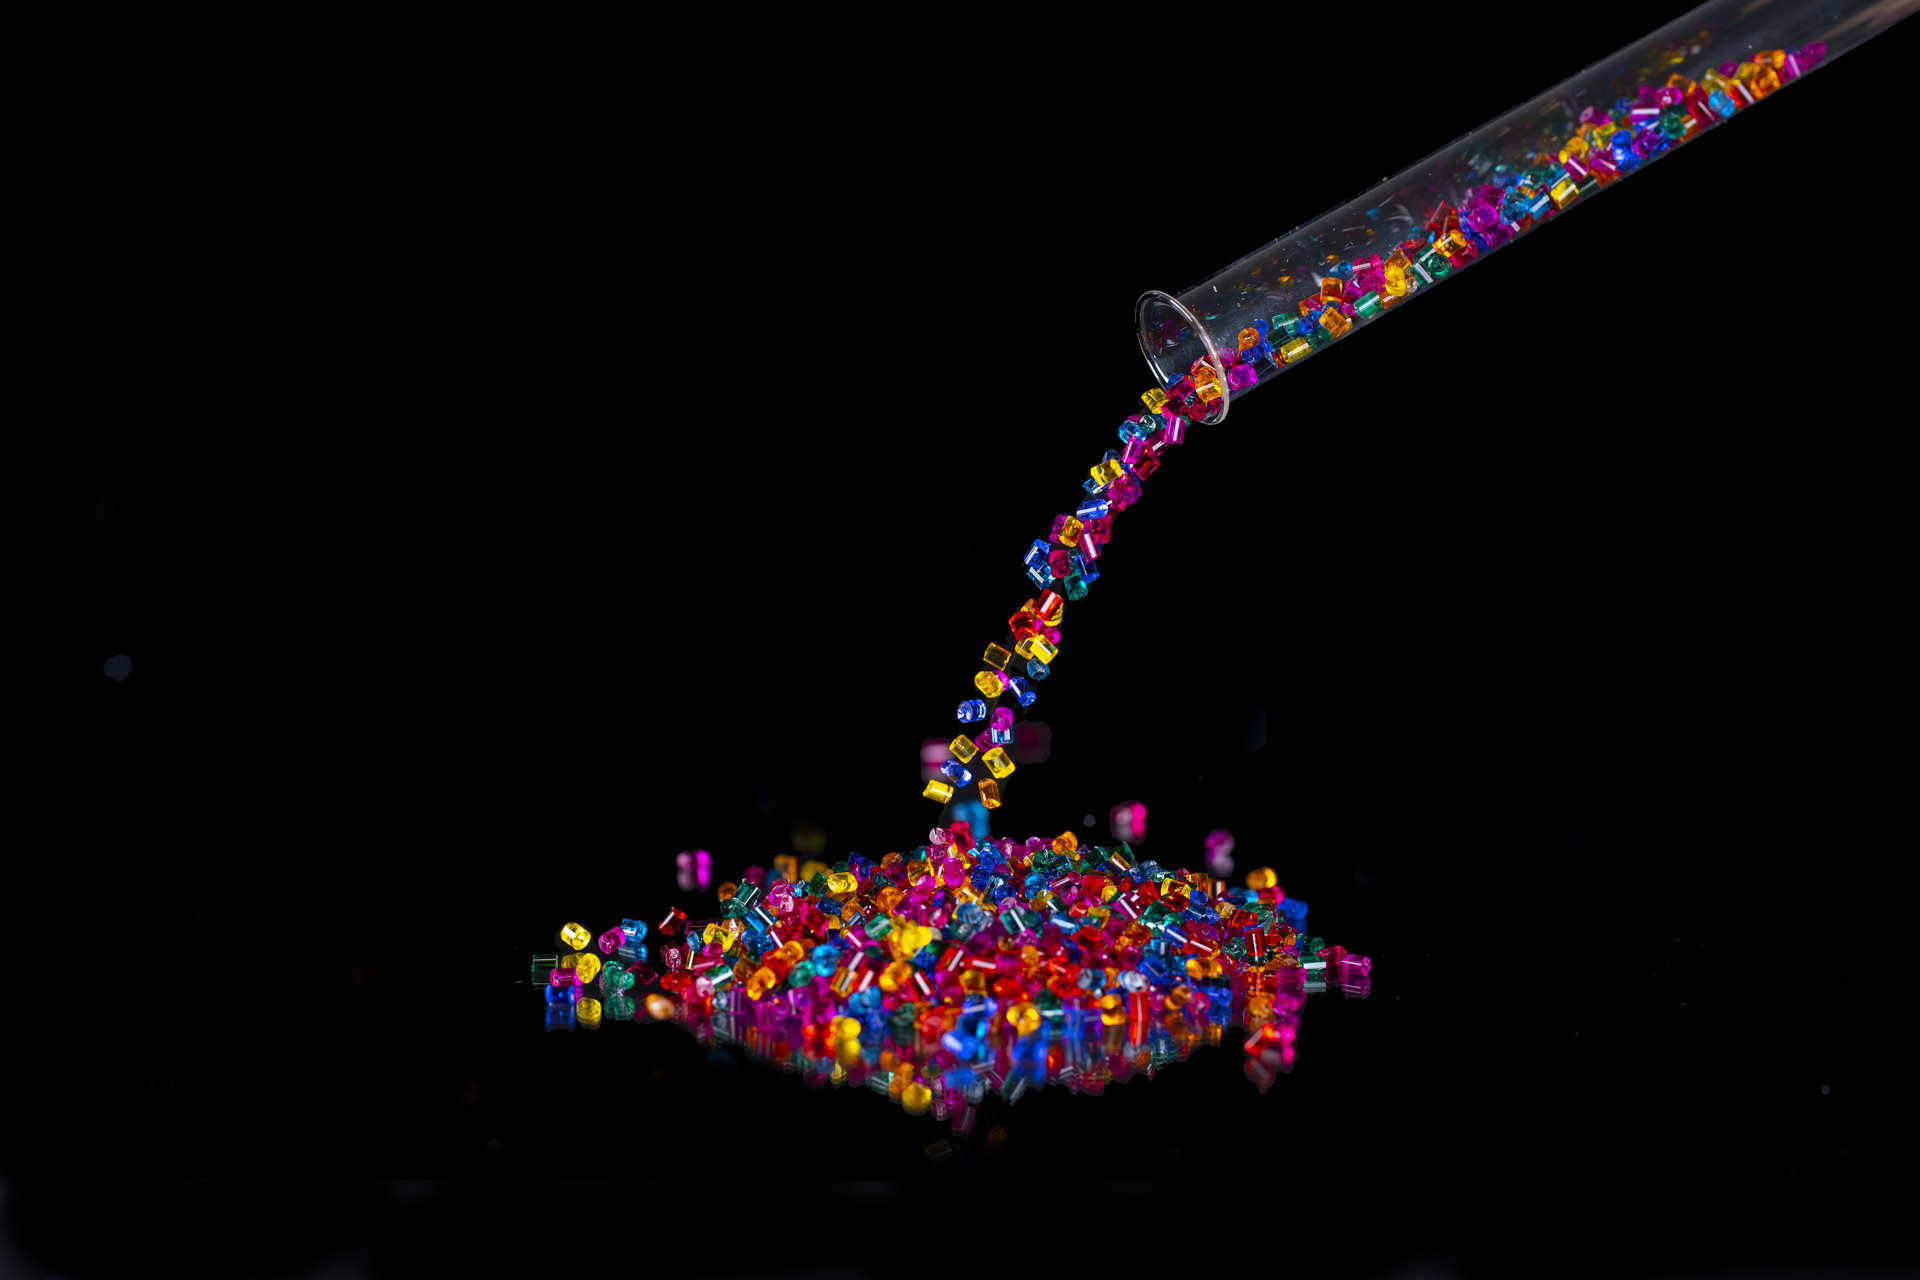 Colorful Macrolex granules are poured from test tube